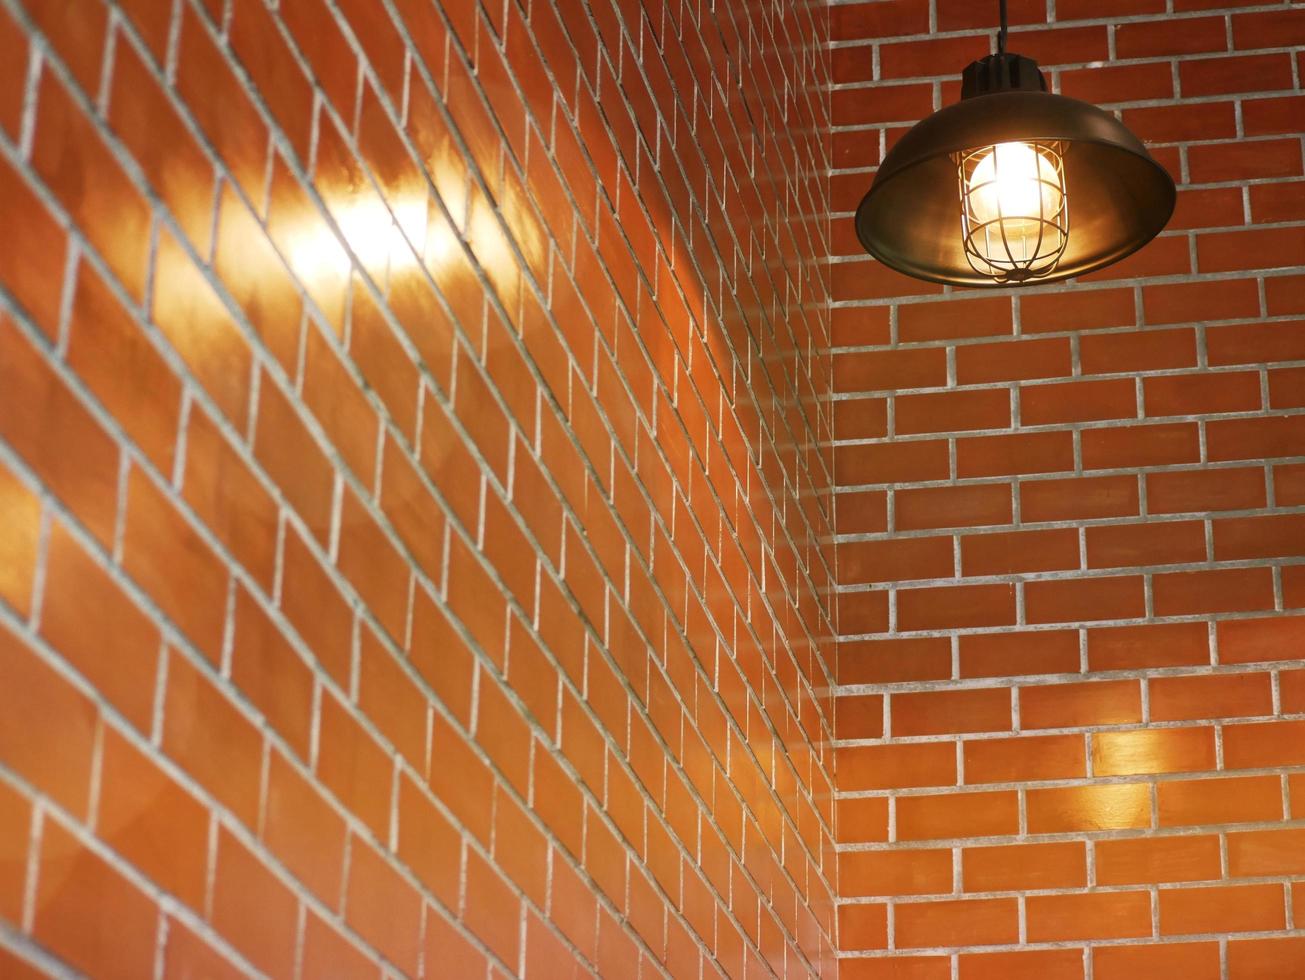 The lamp is hanging on the wall of the cafe. photo